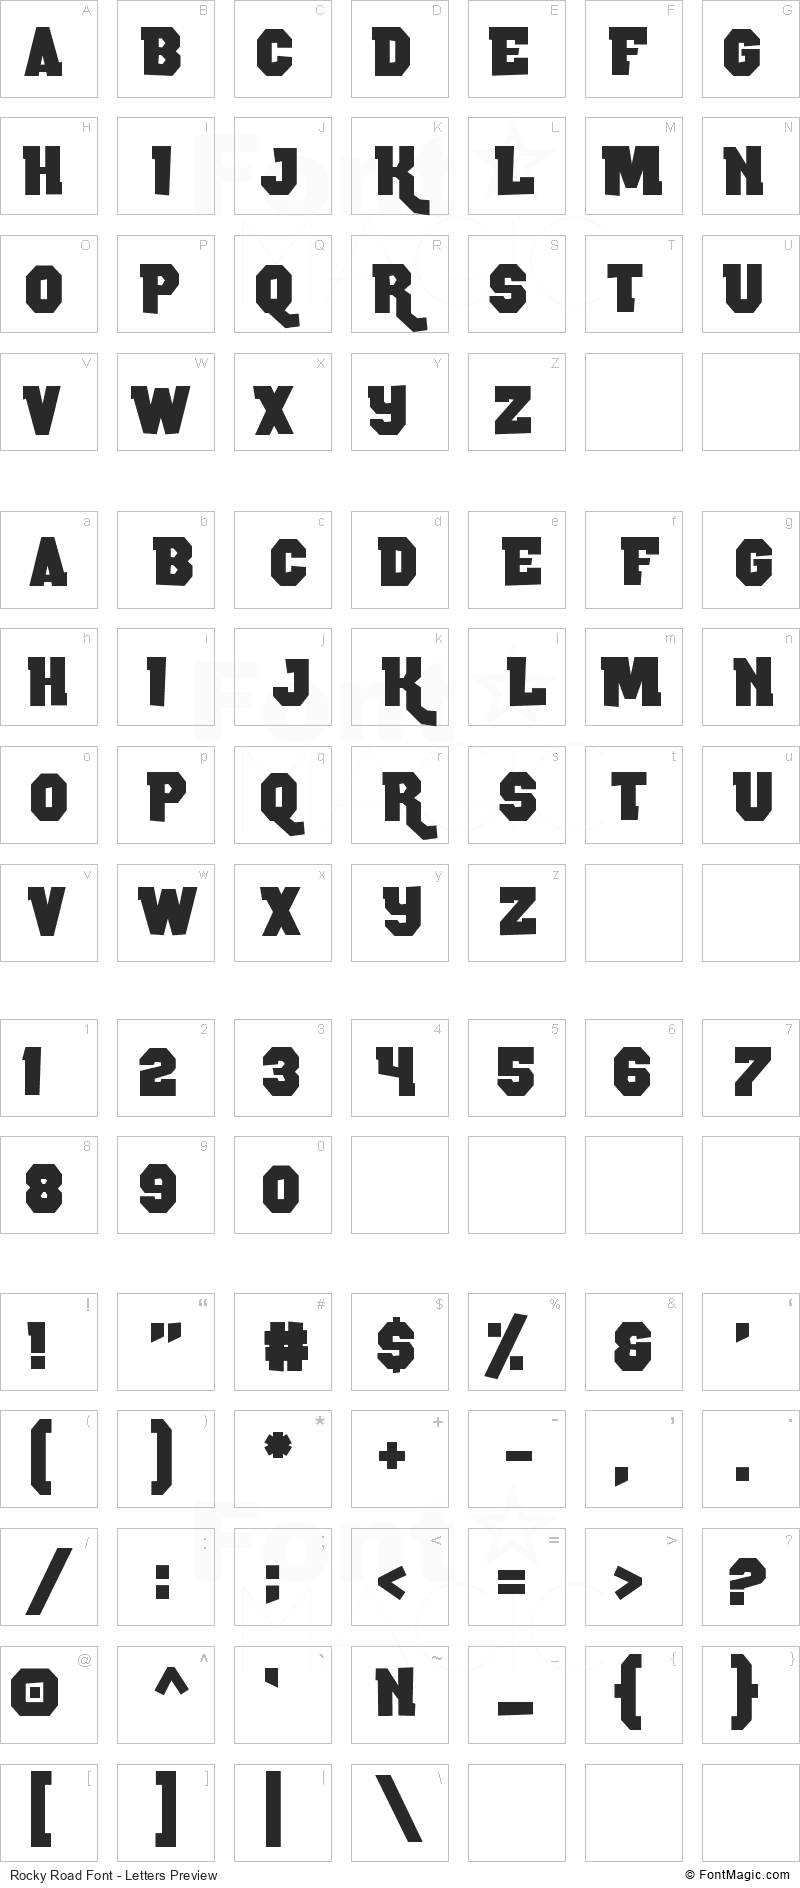 Rocky Road Font - All Latters Preview Chart